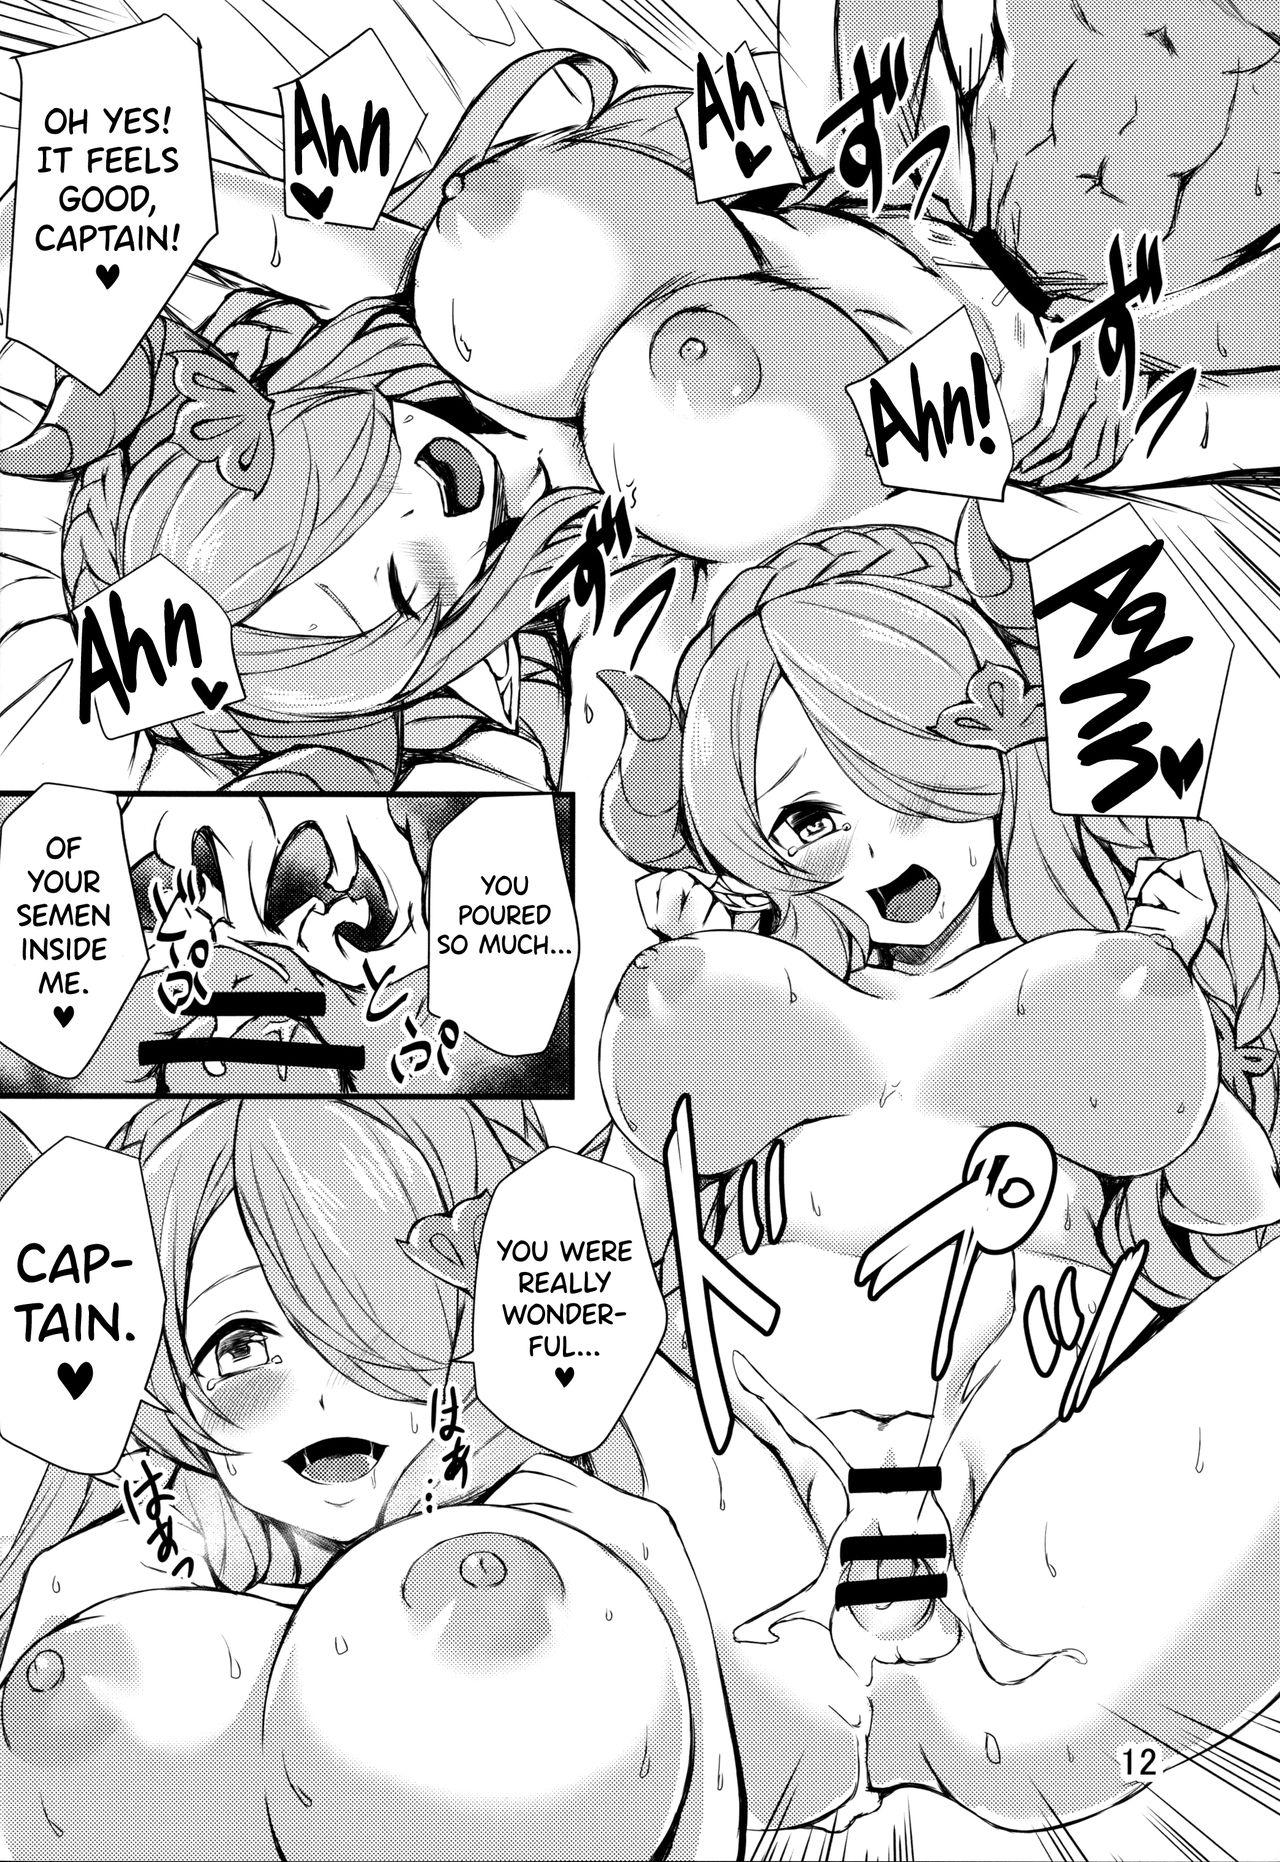 Groupsex Sleepless Night at the Female Draph's Room - Granblue fantasy Amigos - Page 11